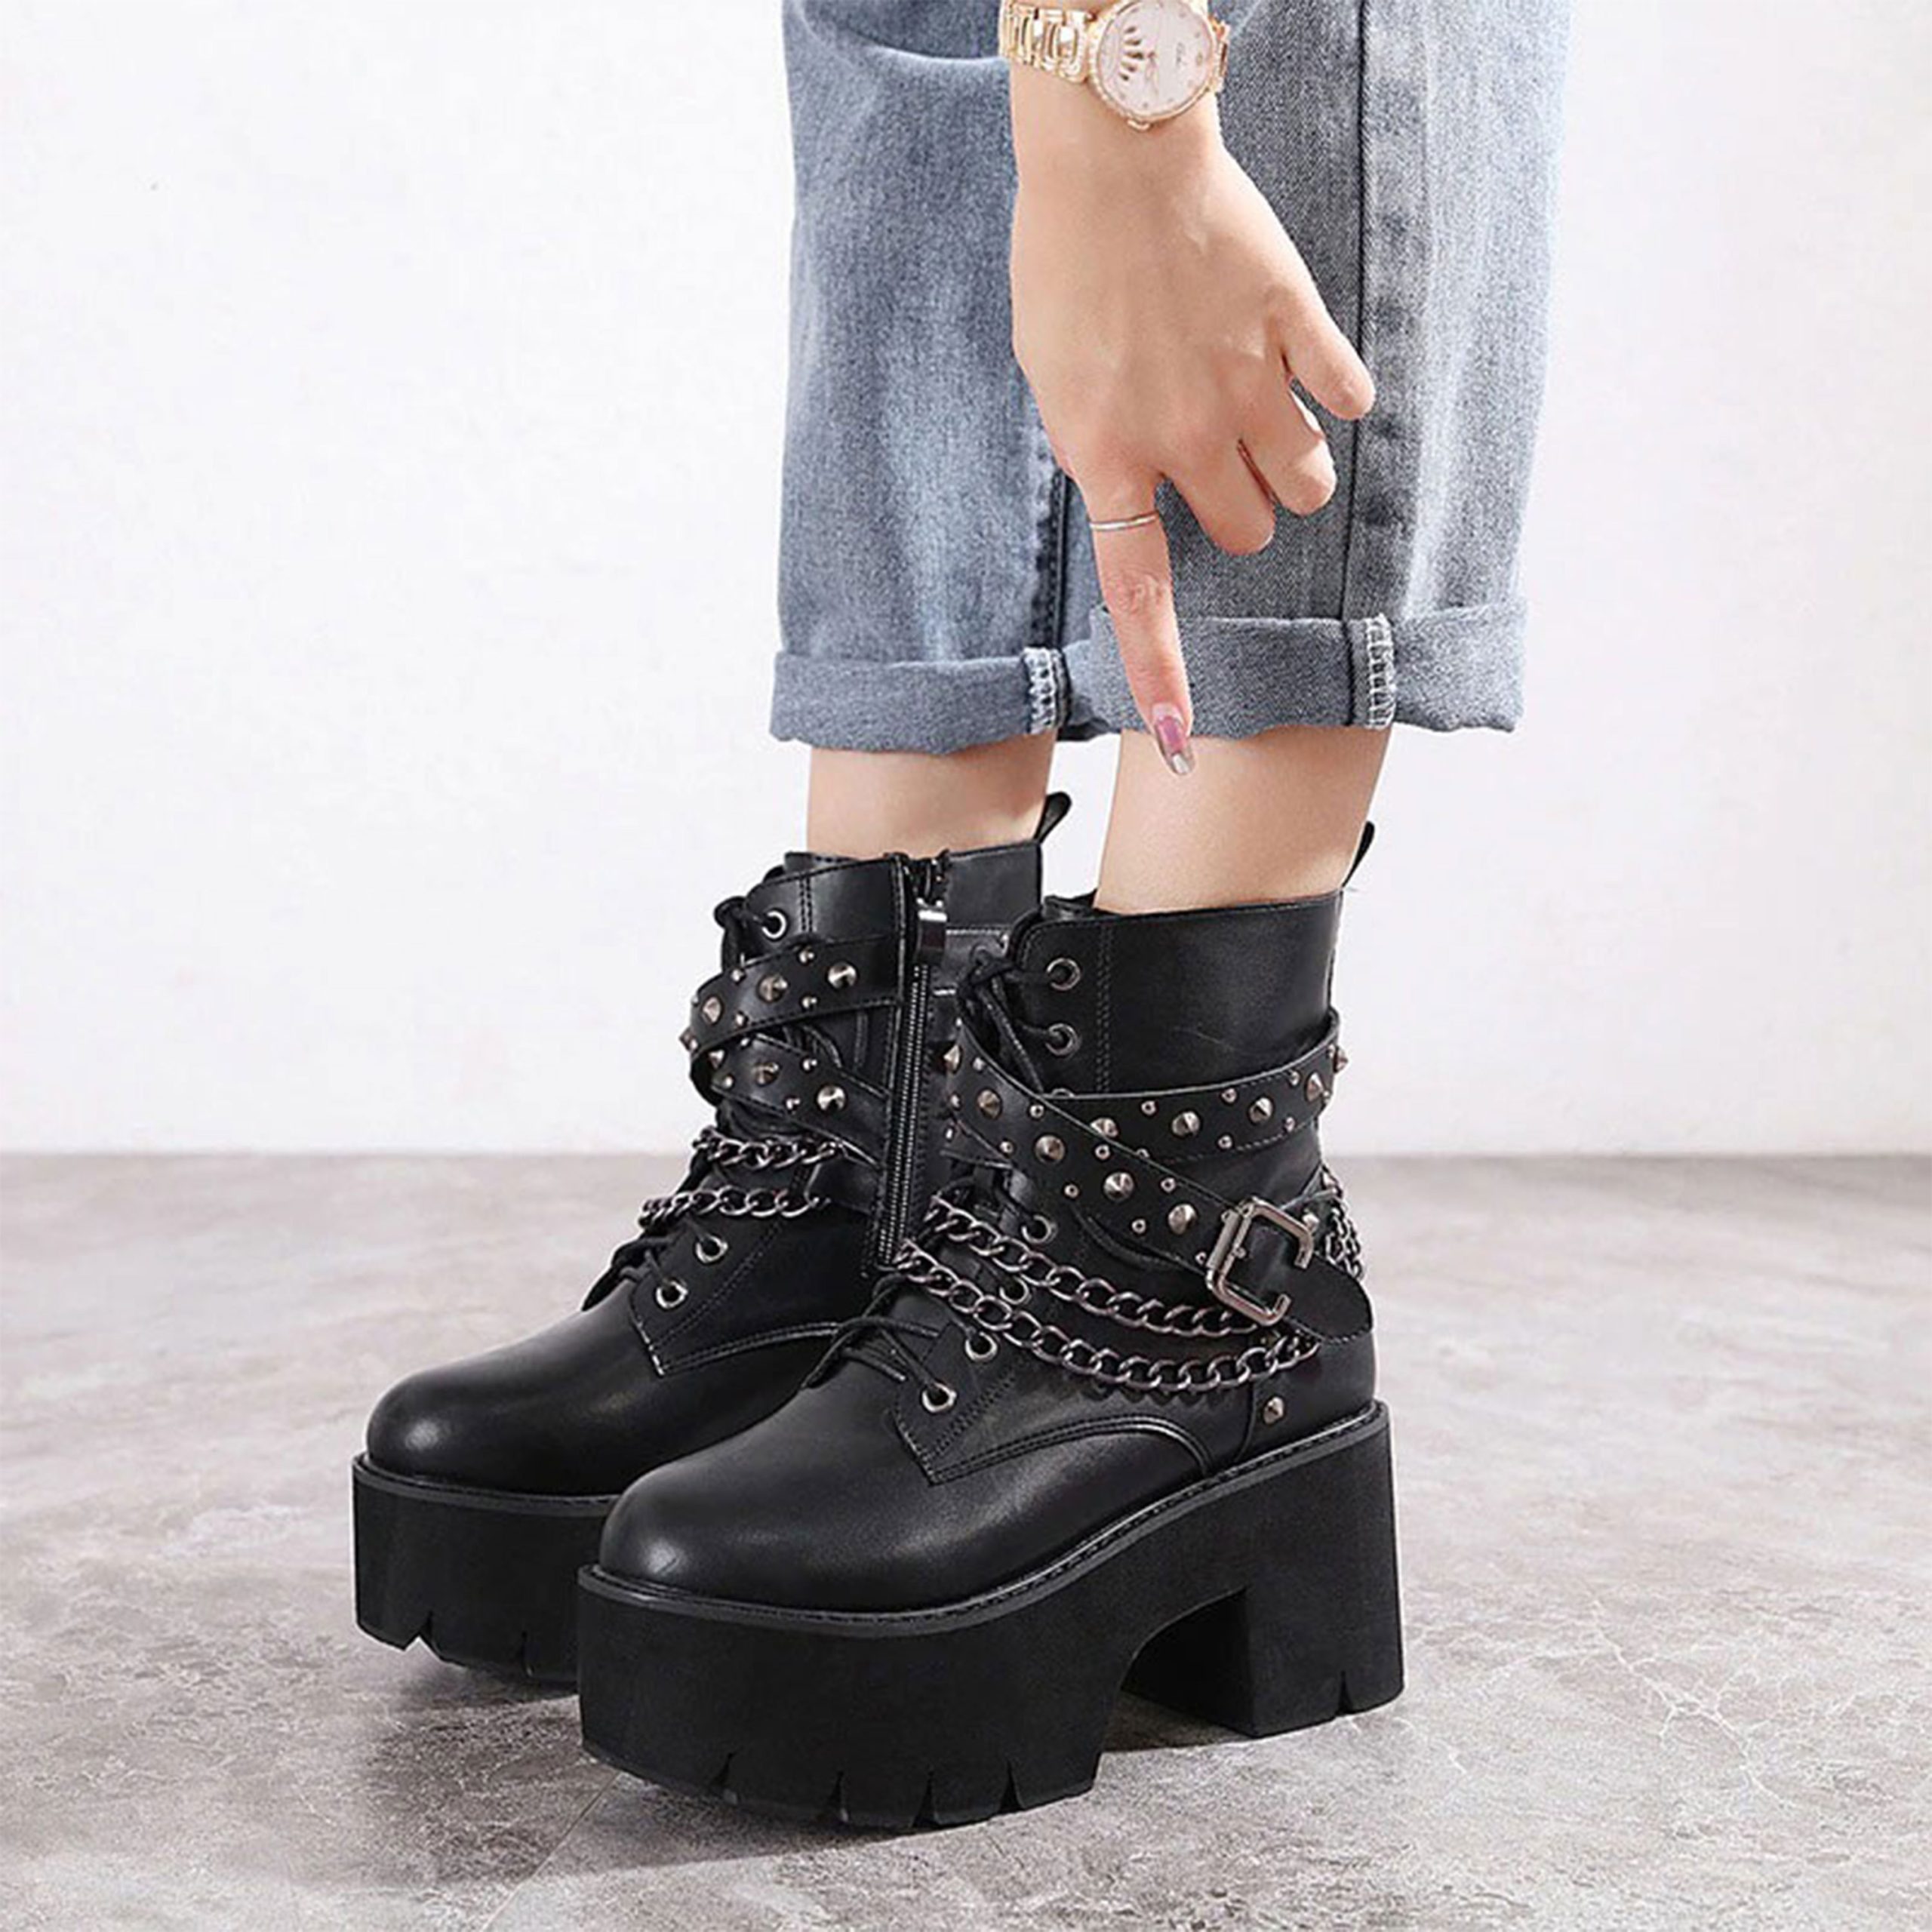 Women's Gothic Platform Boots Lace Up Chunky Heels Motorcycle Biker